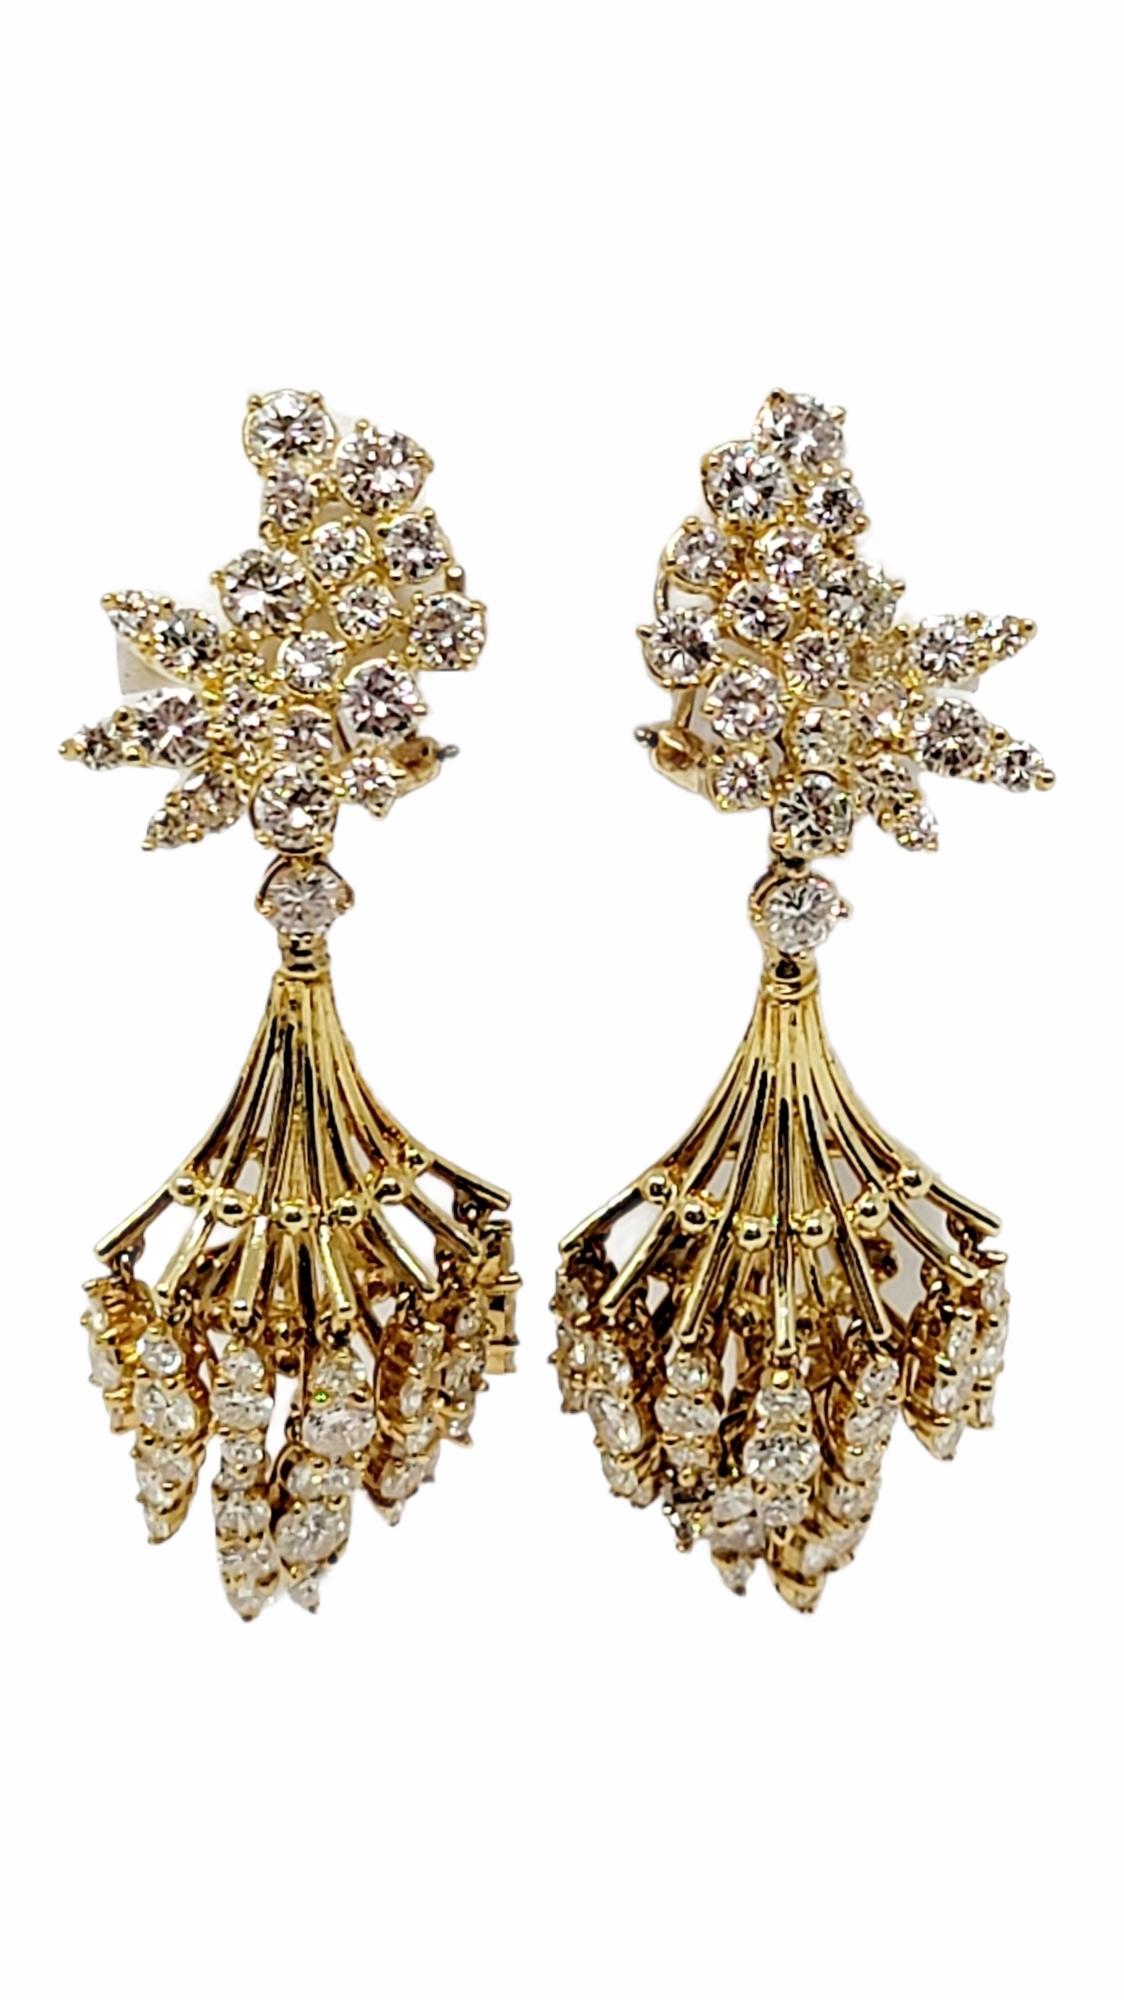 Luxurious, Old World style diamond chandelier earrings are bursting with undeniable sparkle. These exquisite earrings are simply stunning, featuring a unique cluster of icy white diamonds, paired with a cascading spray of additional dangling